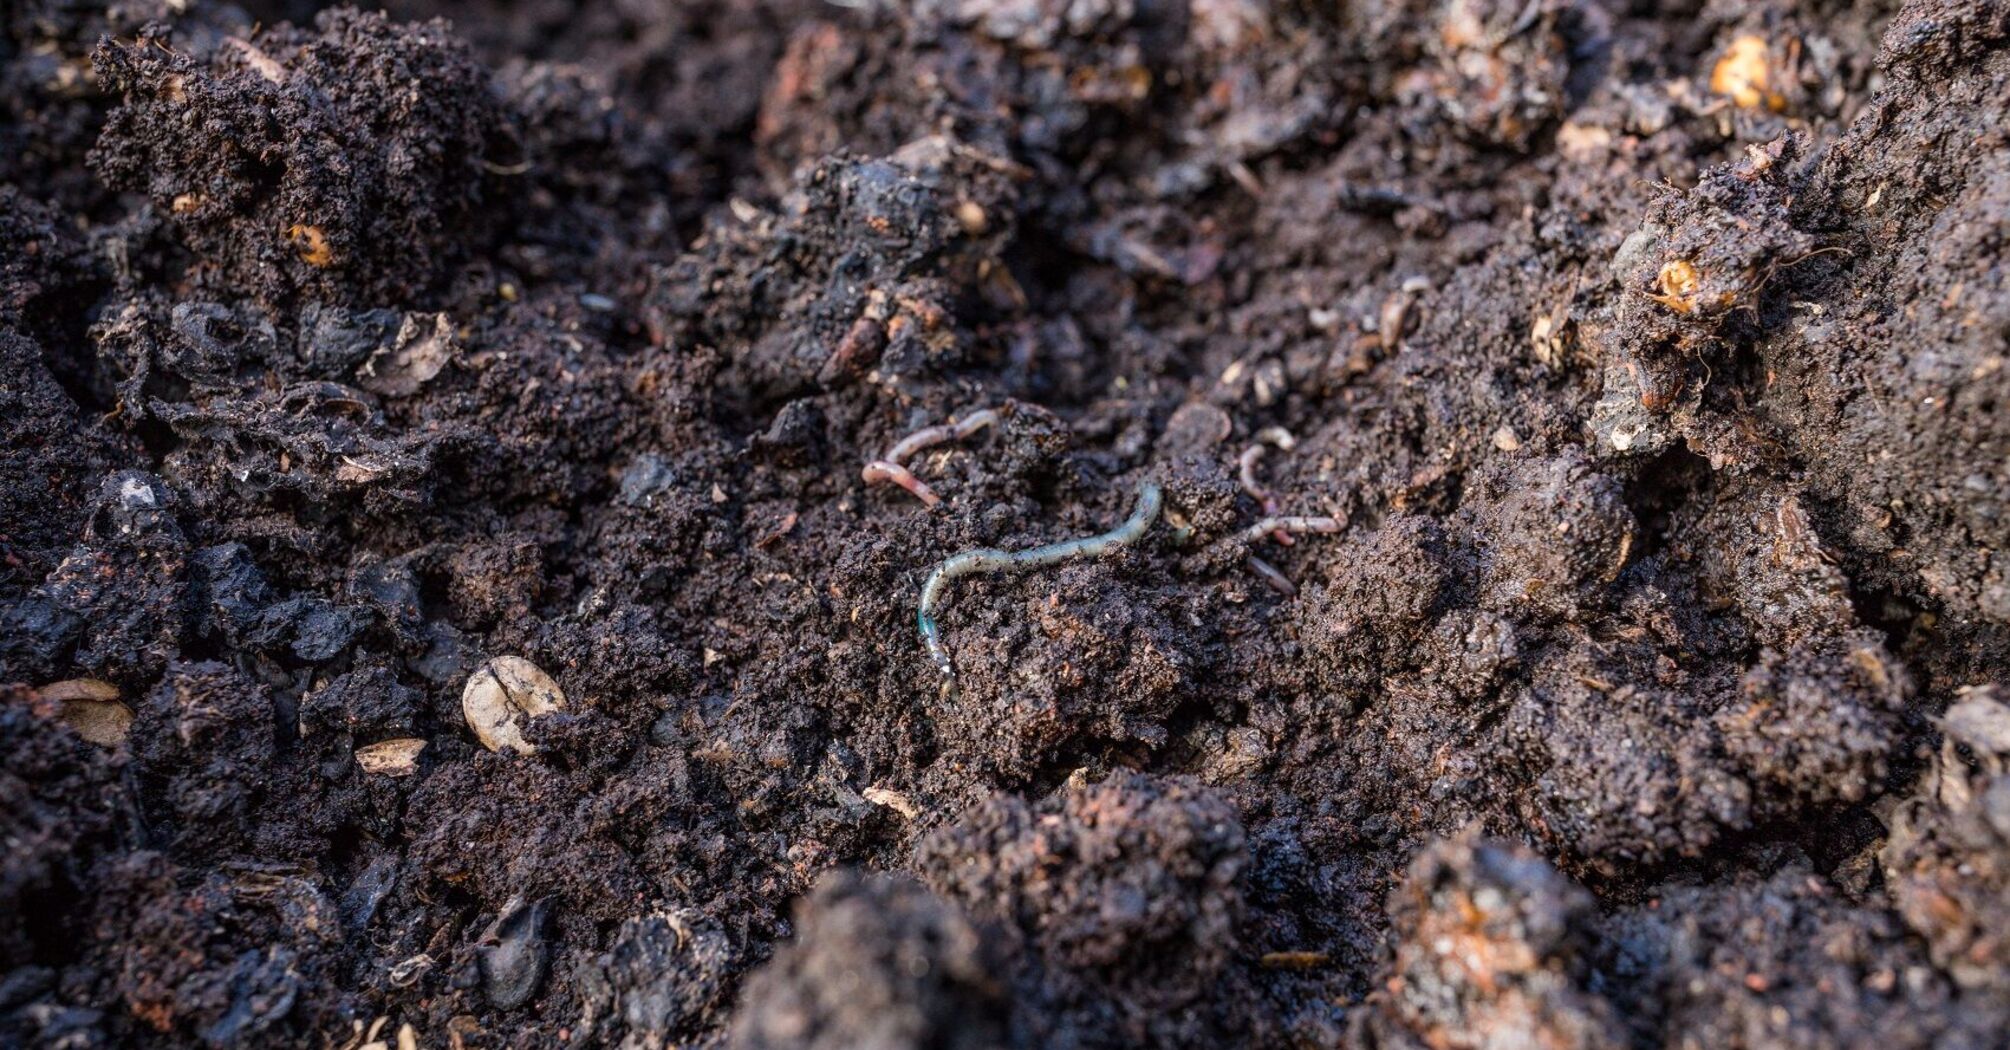 The mystery of the mysterious worms lining up in rows solved (photo)